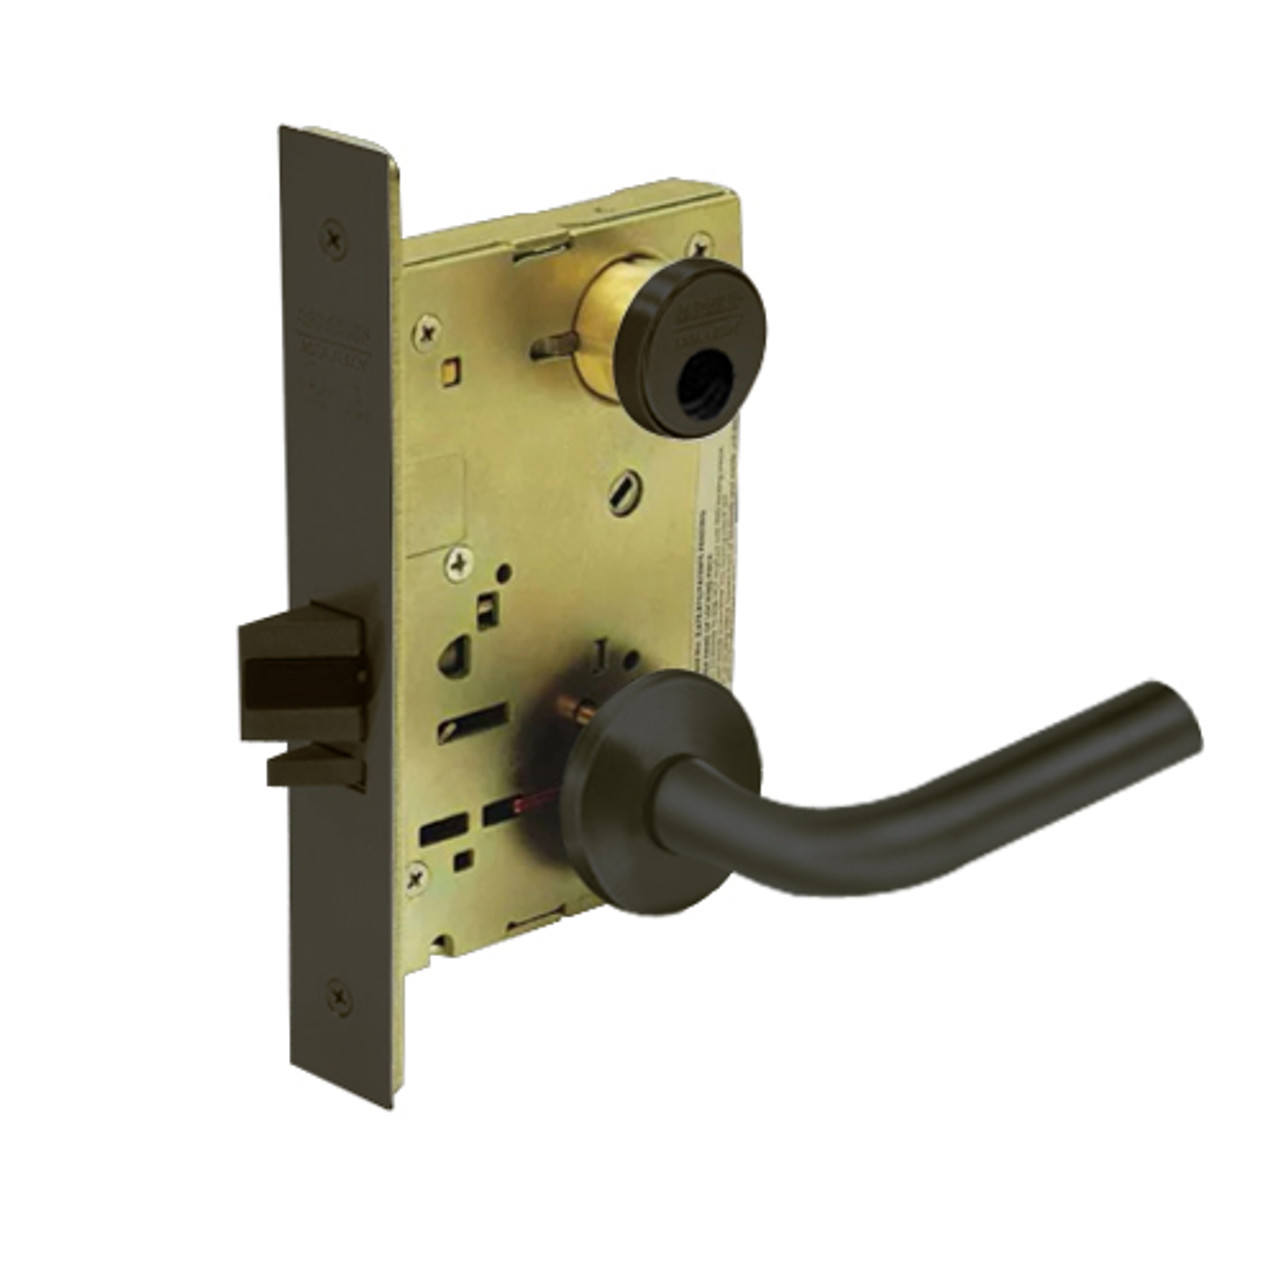 LC-8231-LNW-10B Sargent 8200 Series Utility Mortise Lock with LNW Lever Trim Less Cylinder in Oxidized Dull Bronze